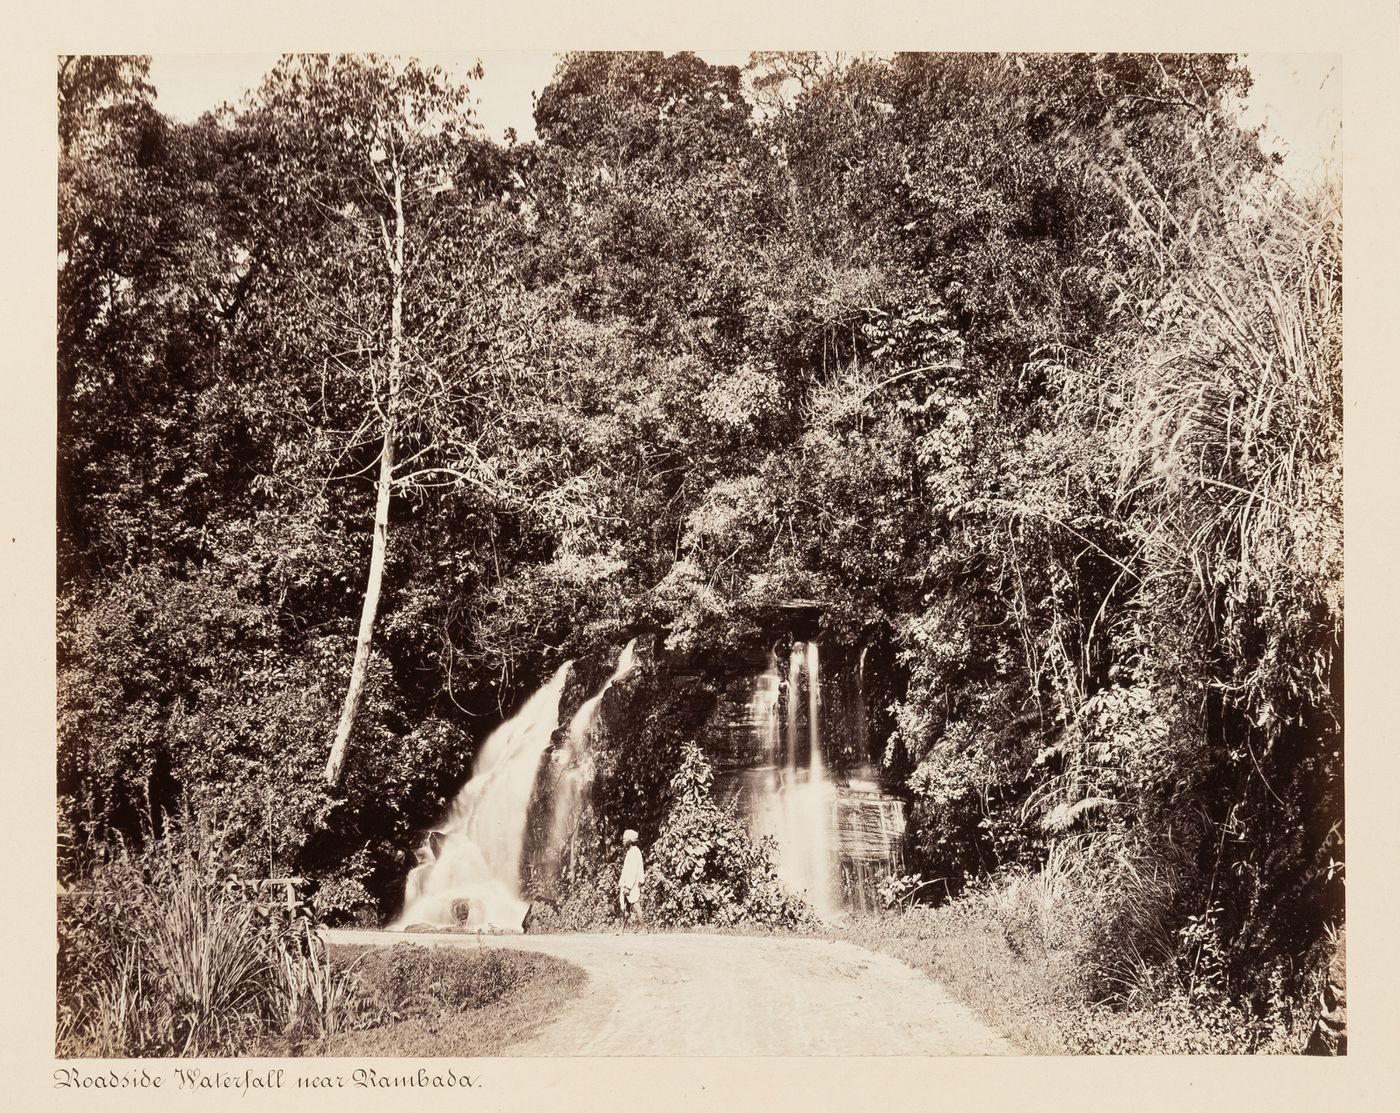 View of a waterfall with a road and man in the foreground, near Ramboda, Ceylon (now Sri Lanka)